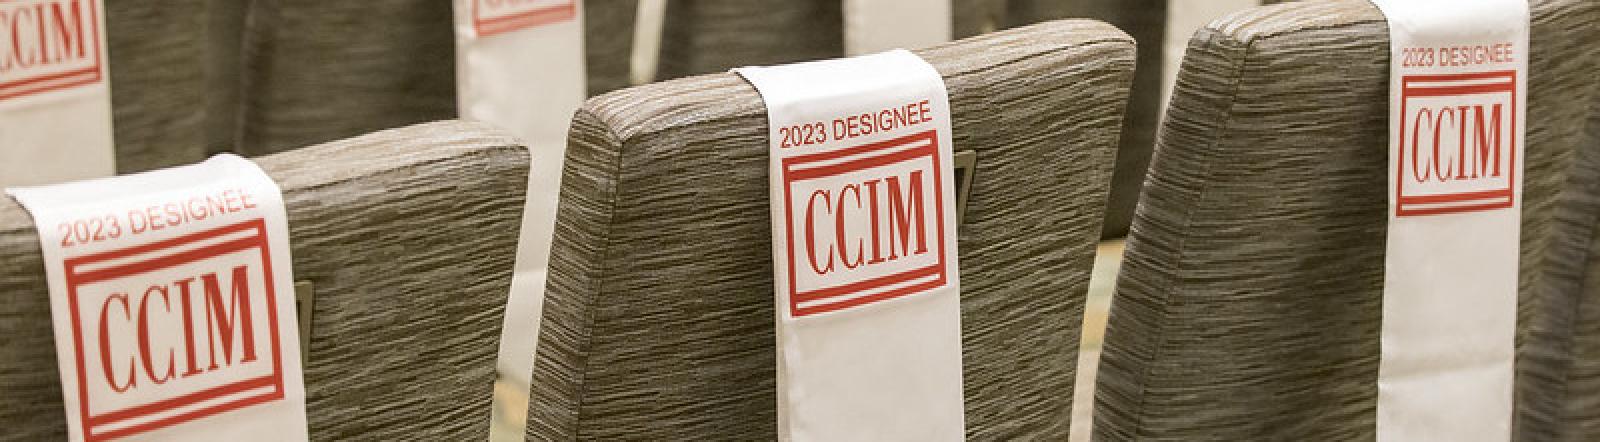 CCIM banners for pinning